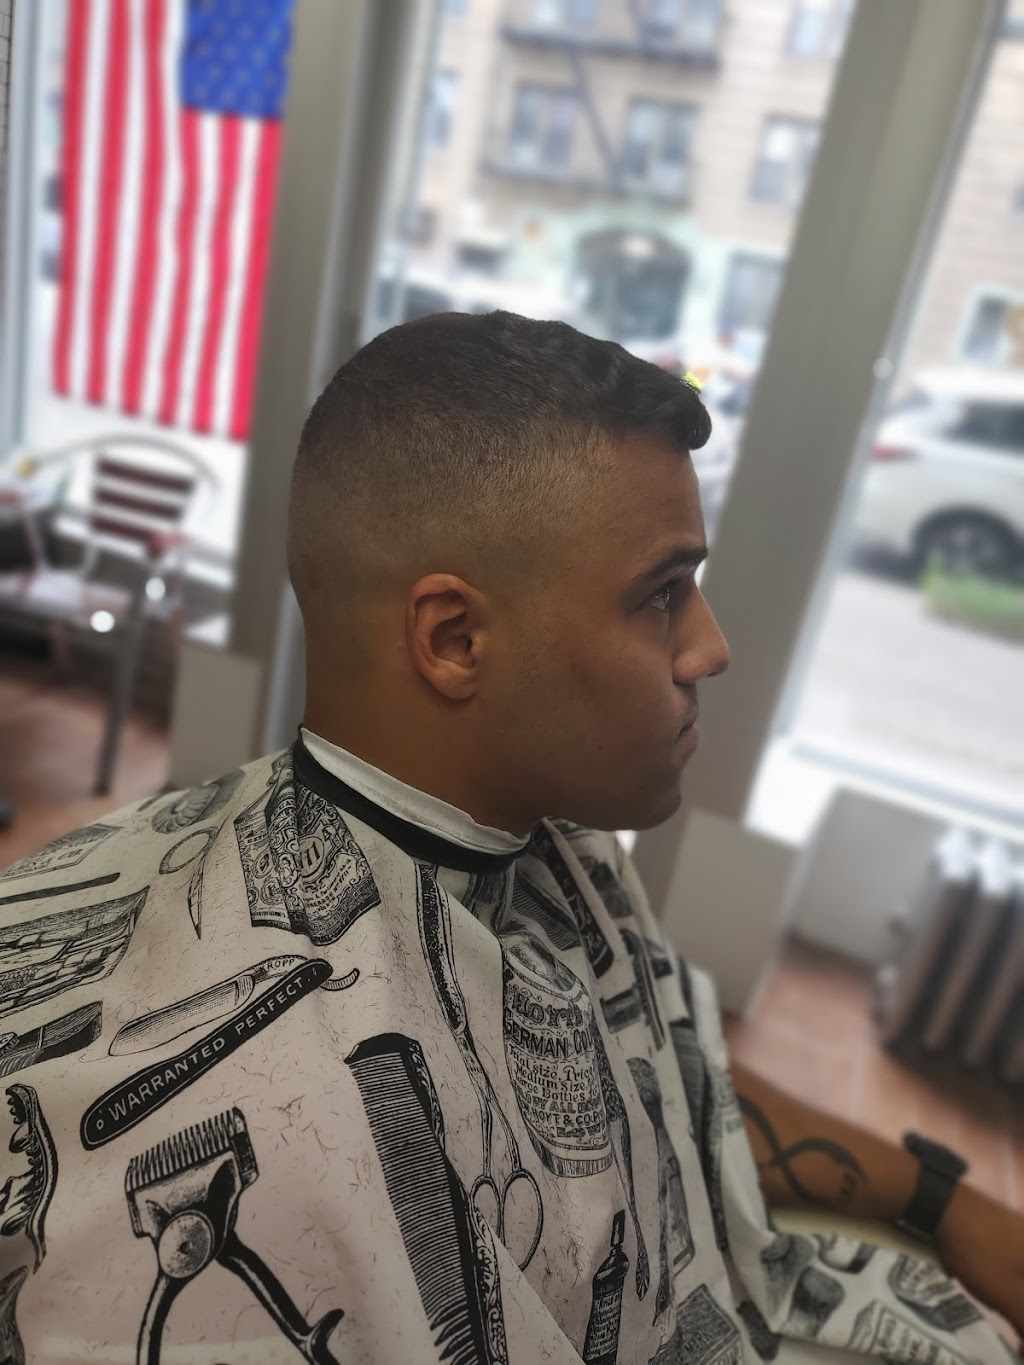 The Barber Shop | 29-19 21st Ave, Queens, NY 11105 | Phone: (718) 606-1941